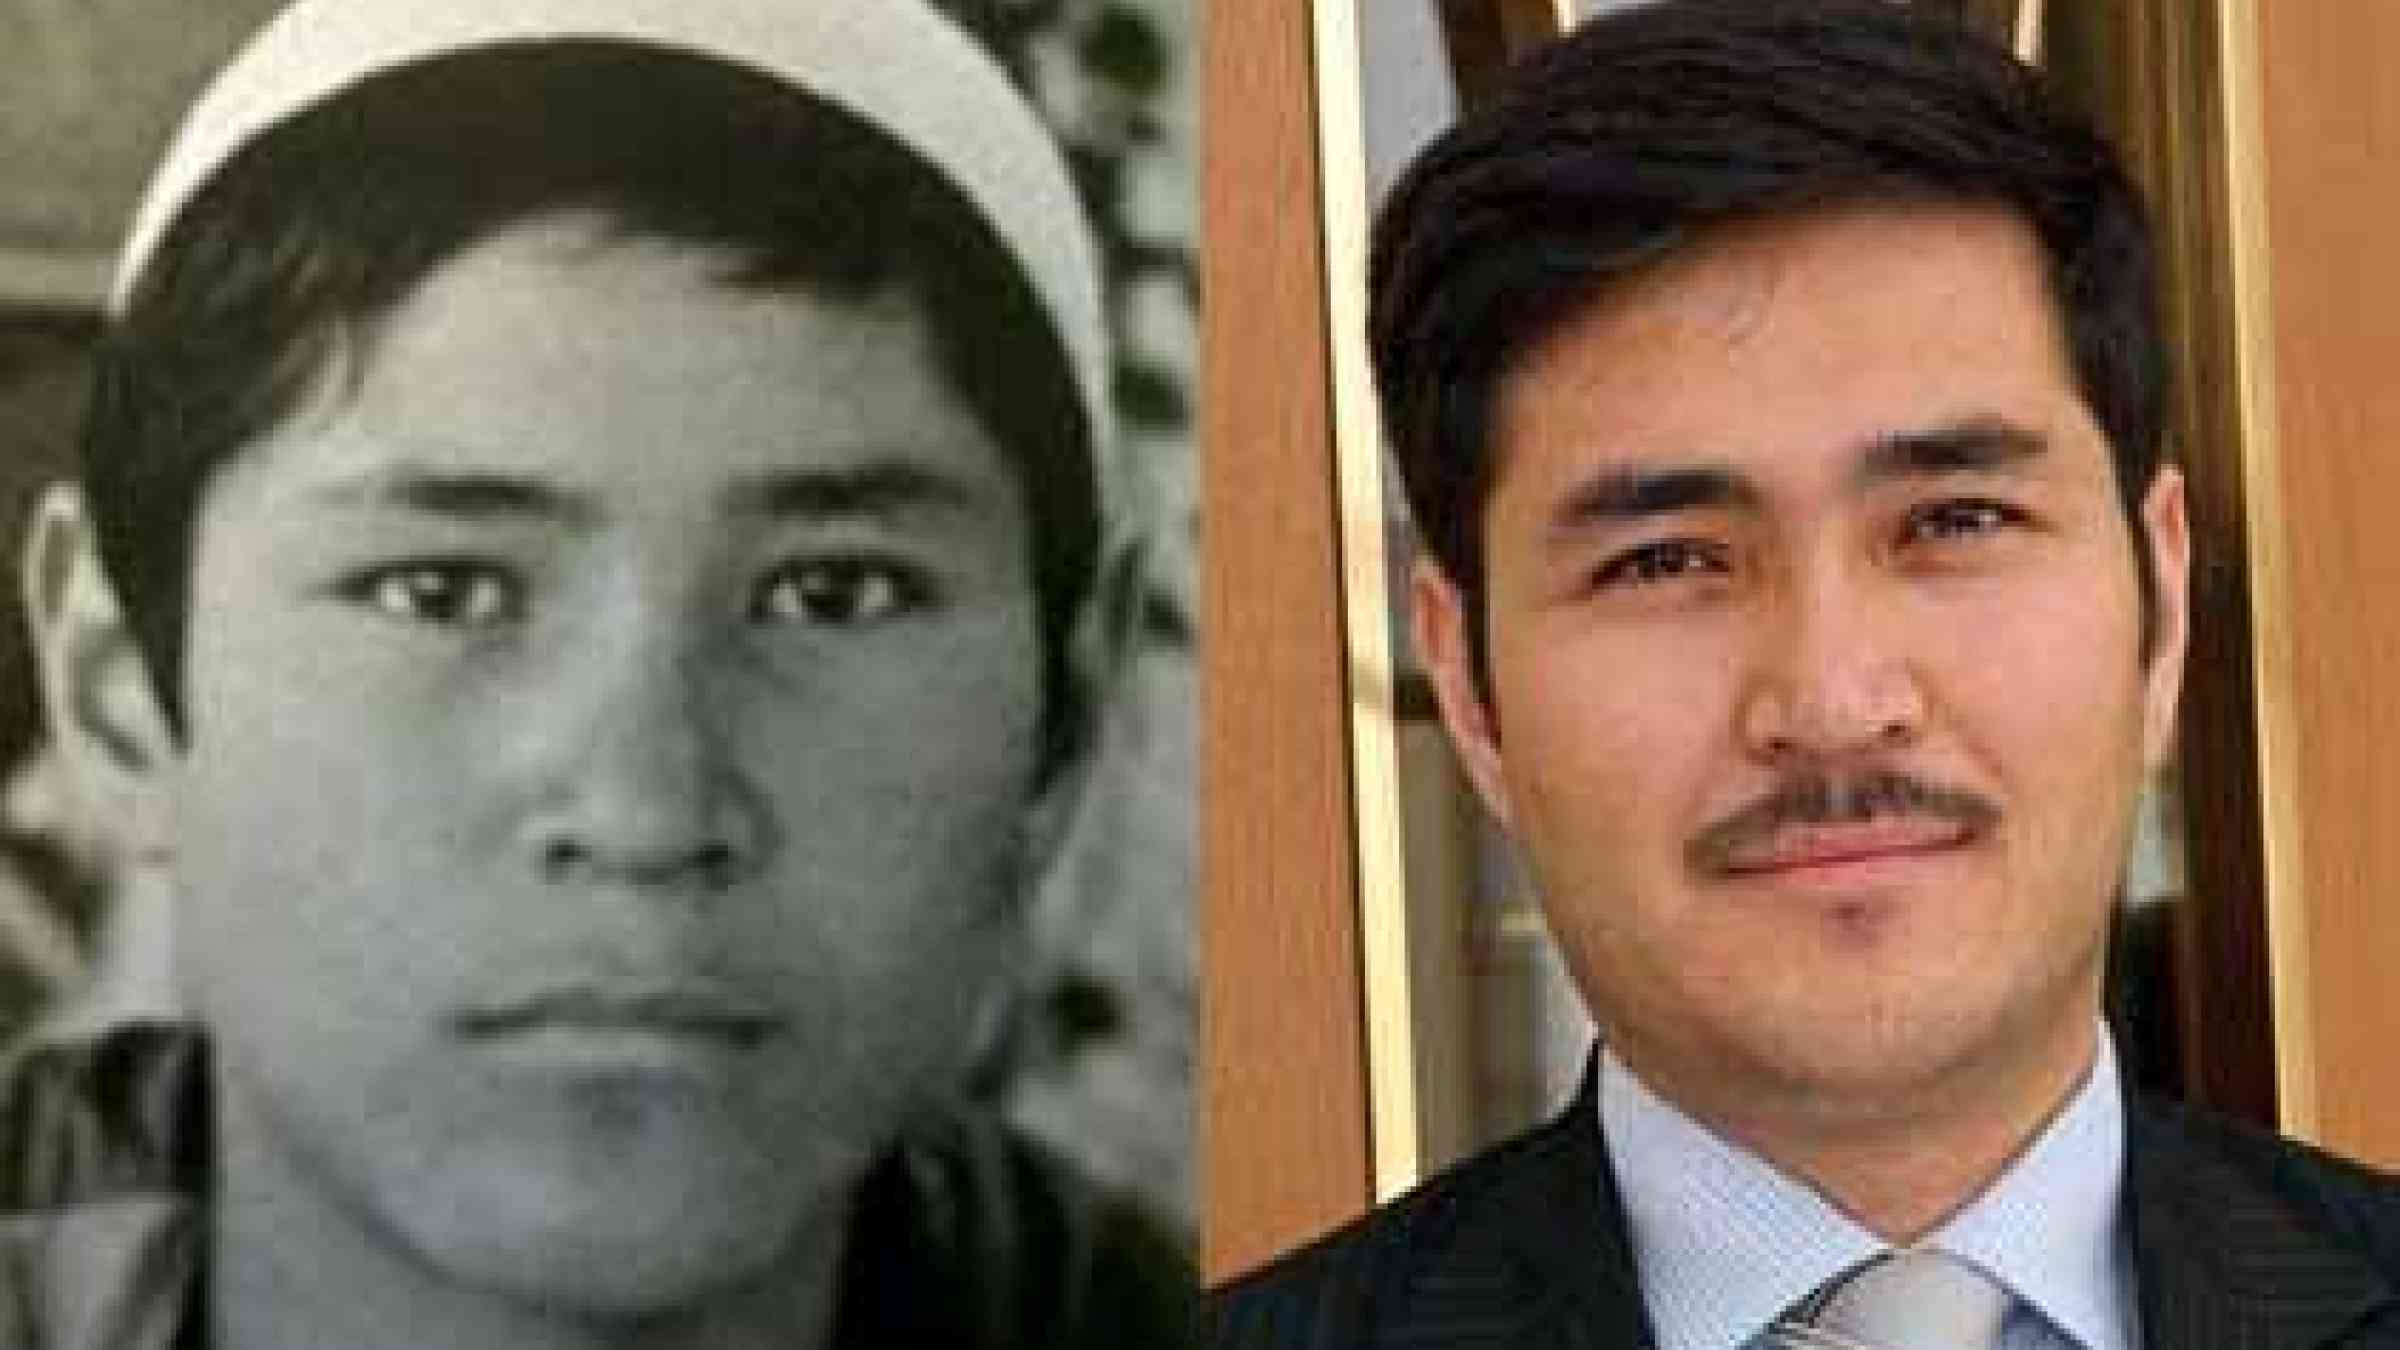 <b>Resilient character: </b>Firoz Ali Alizada soon after his amputations (left) and as an adult still wearing the same determined look to succeed and contribute in life.